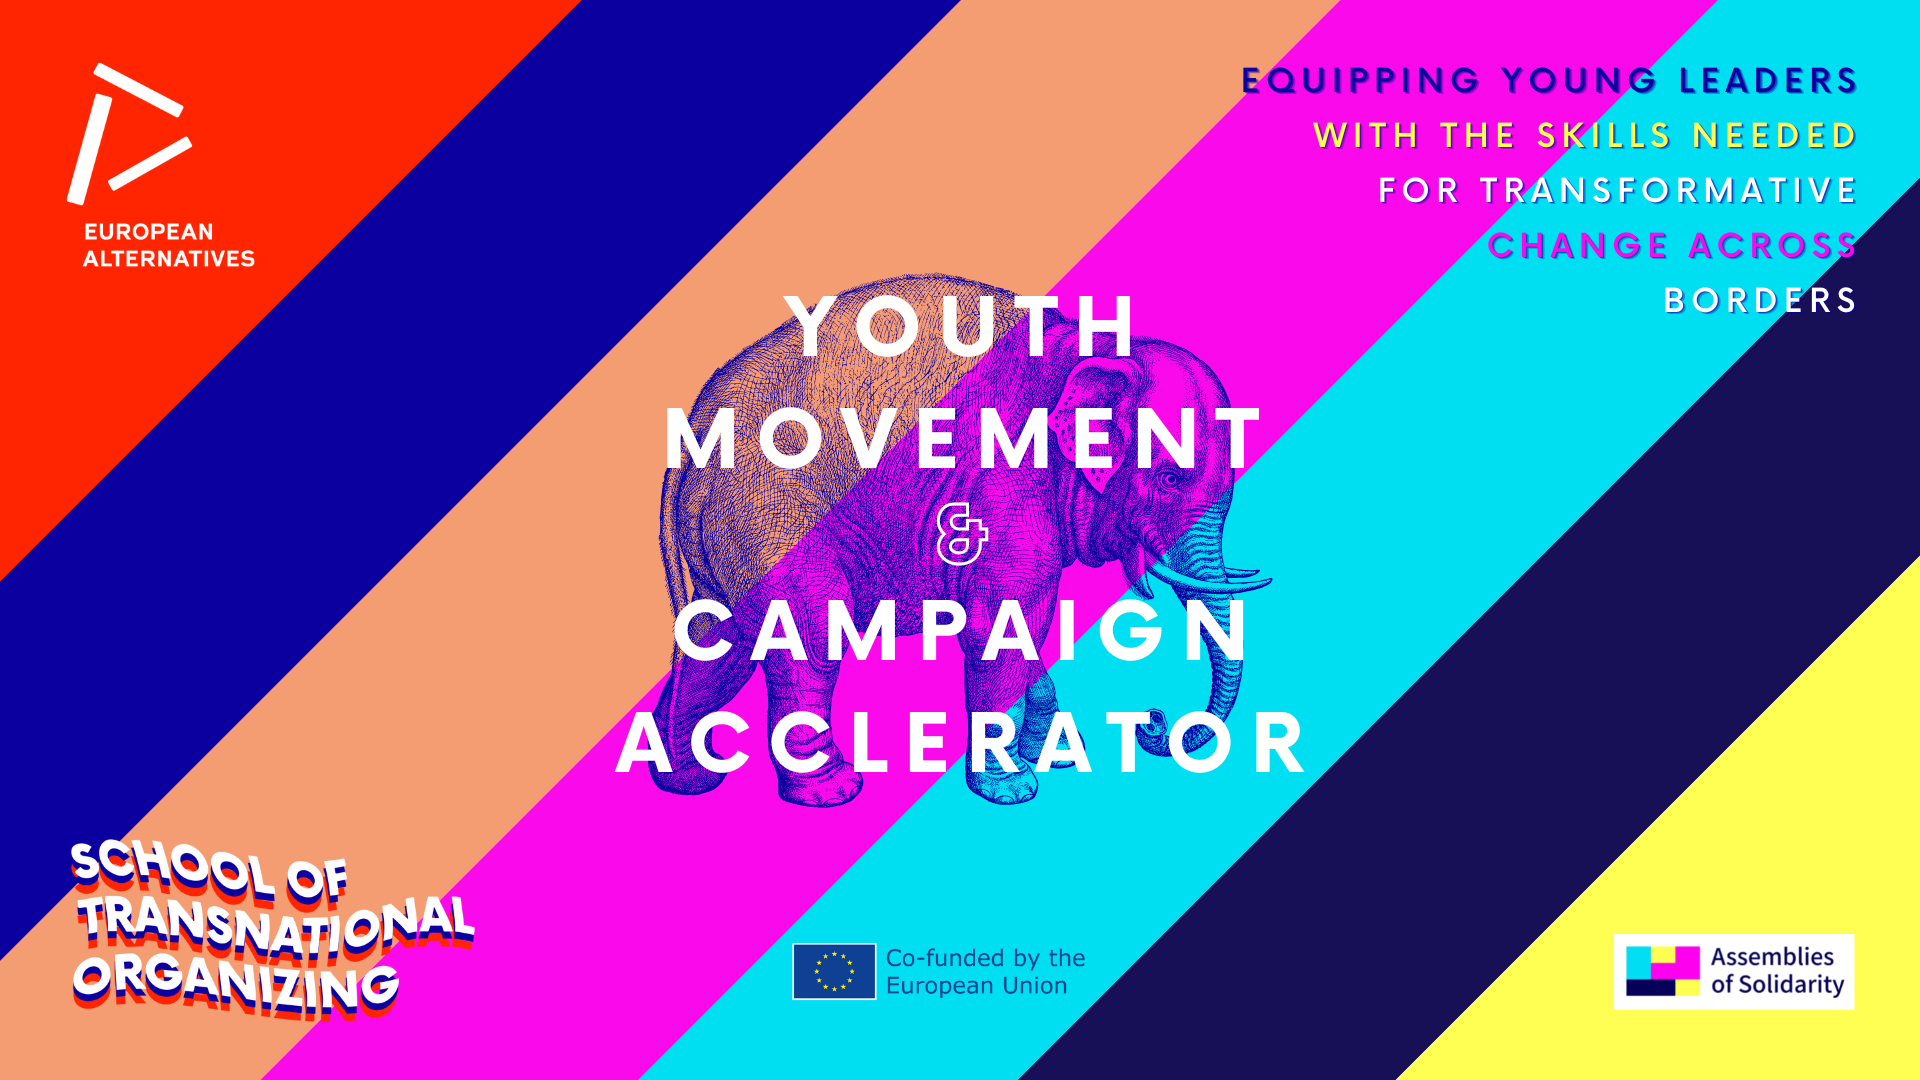 Youth Movement & Campaign Accelerator